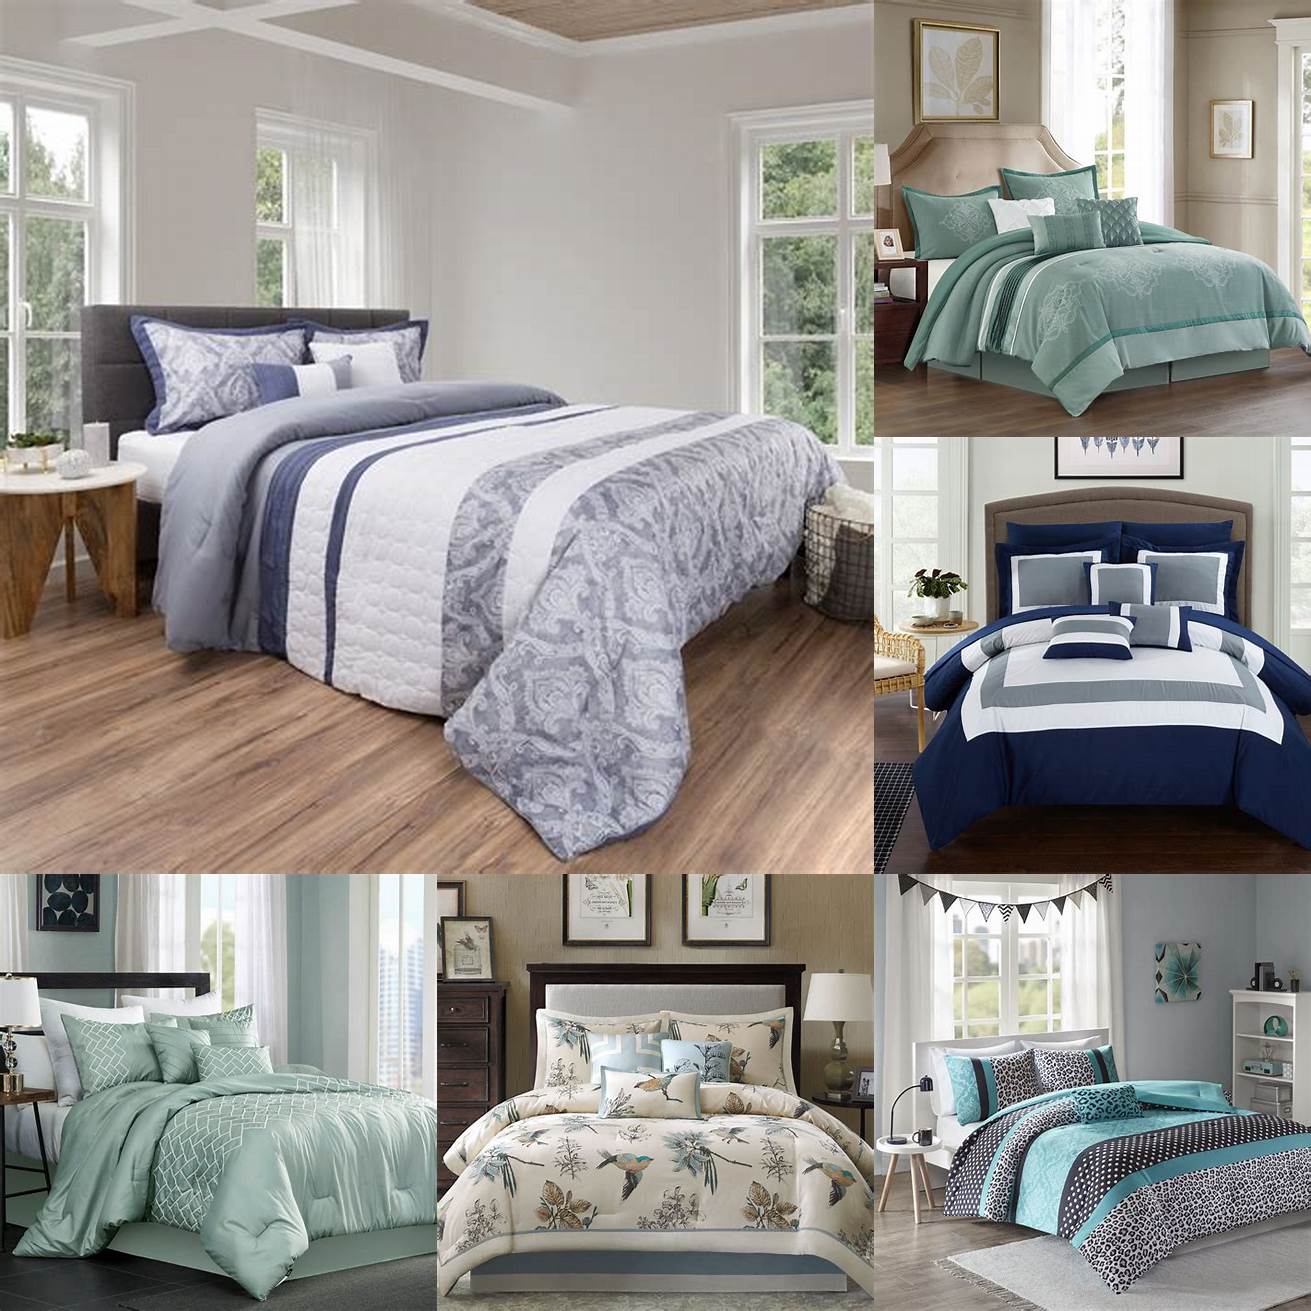 2 Limited bedding options